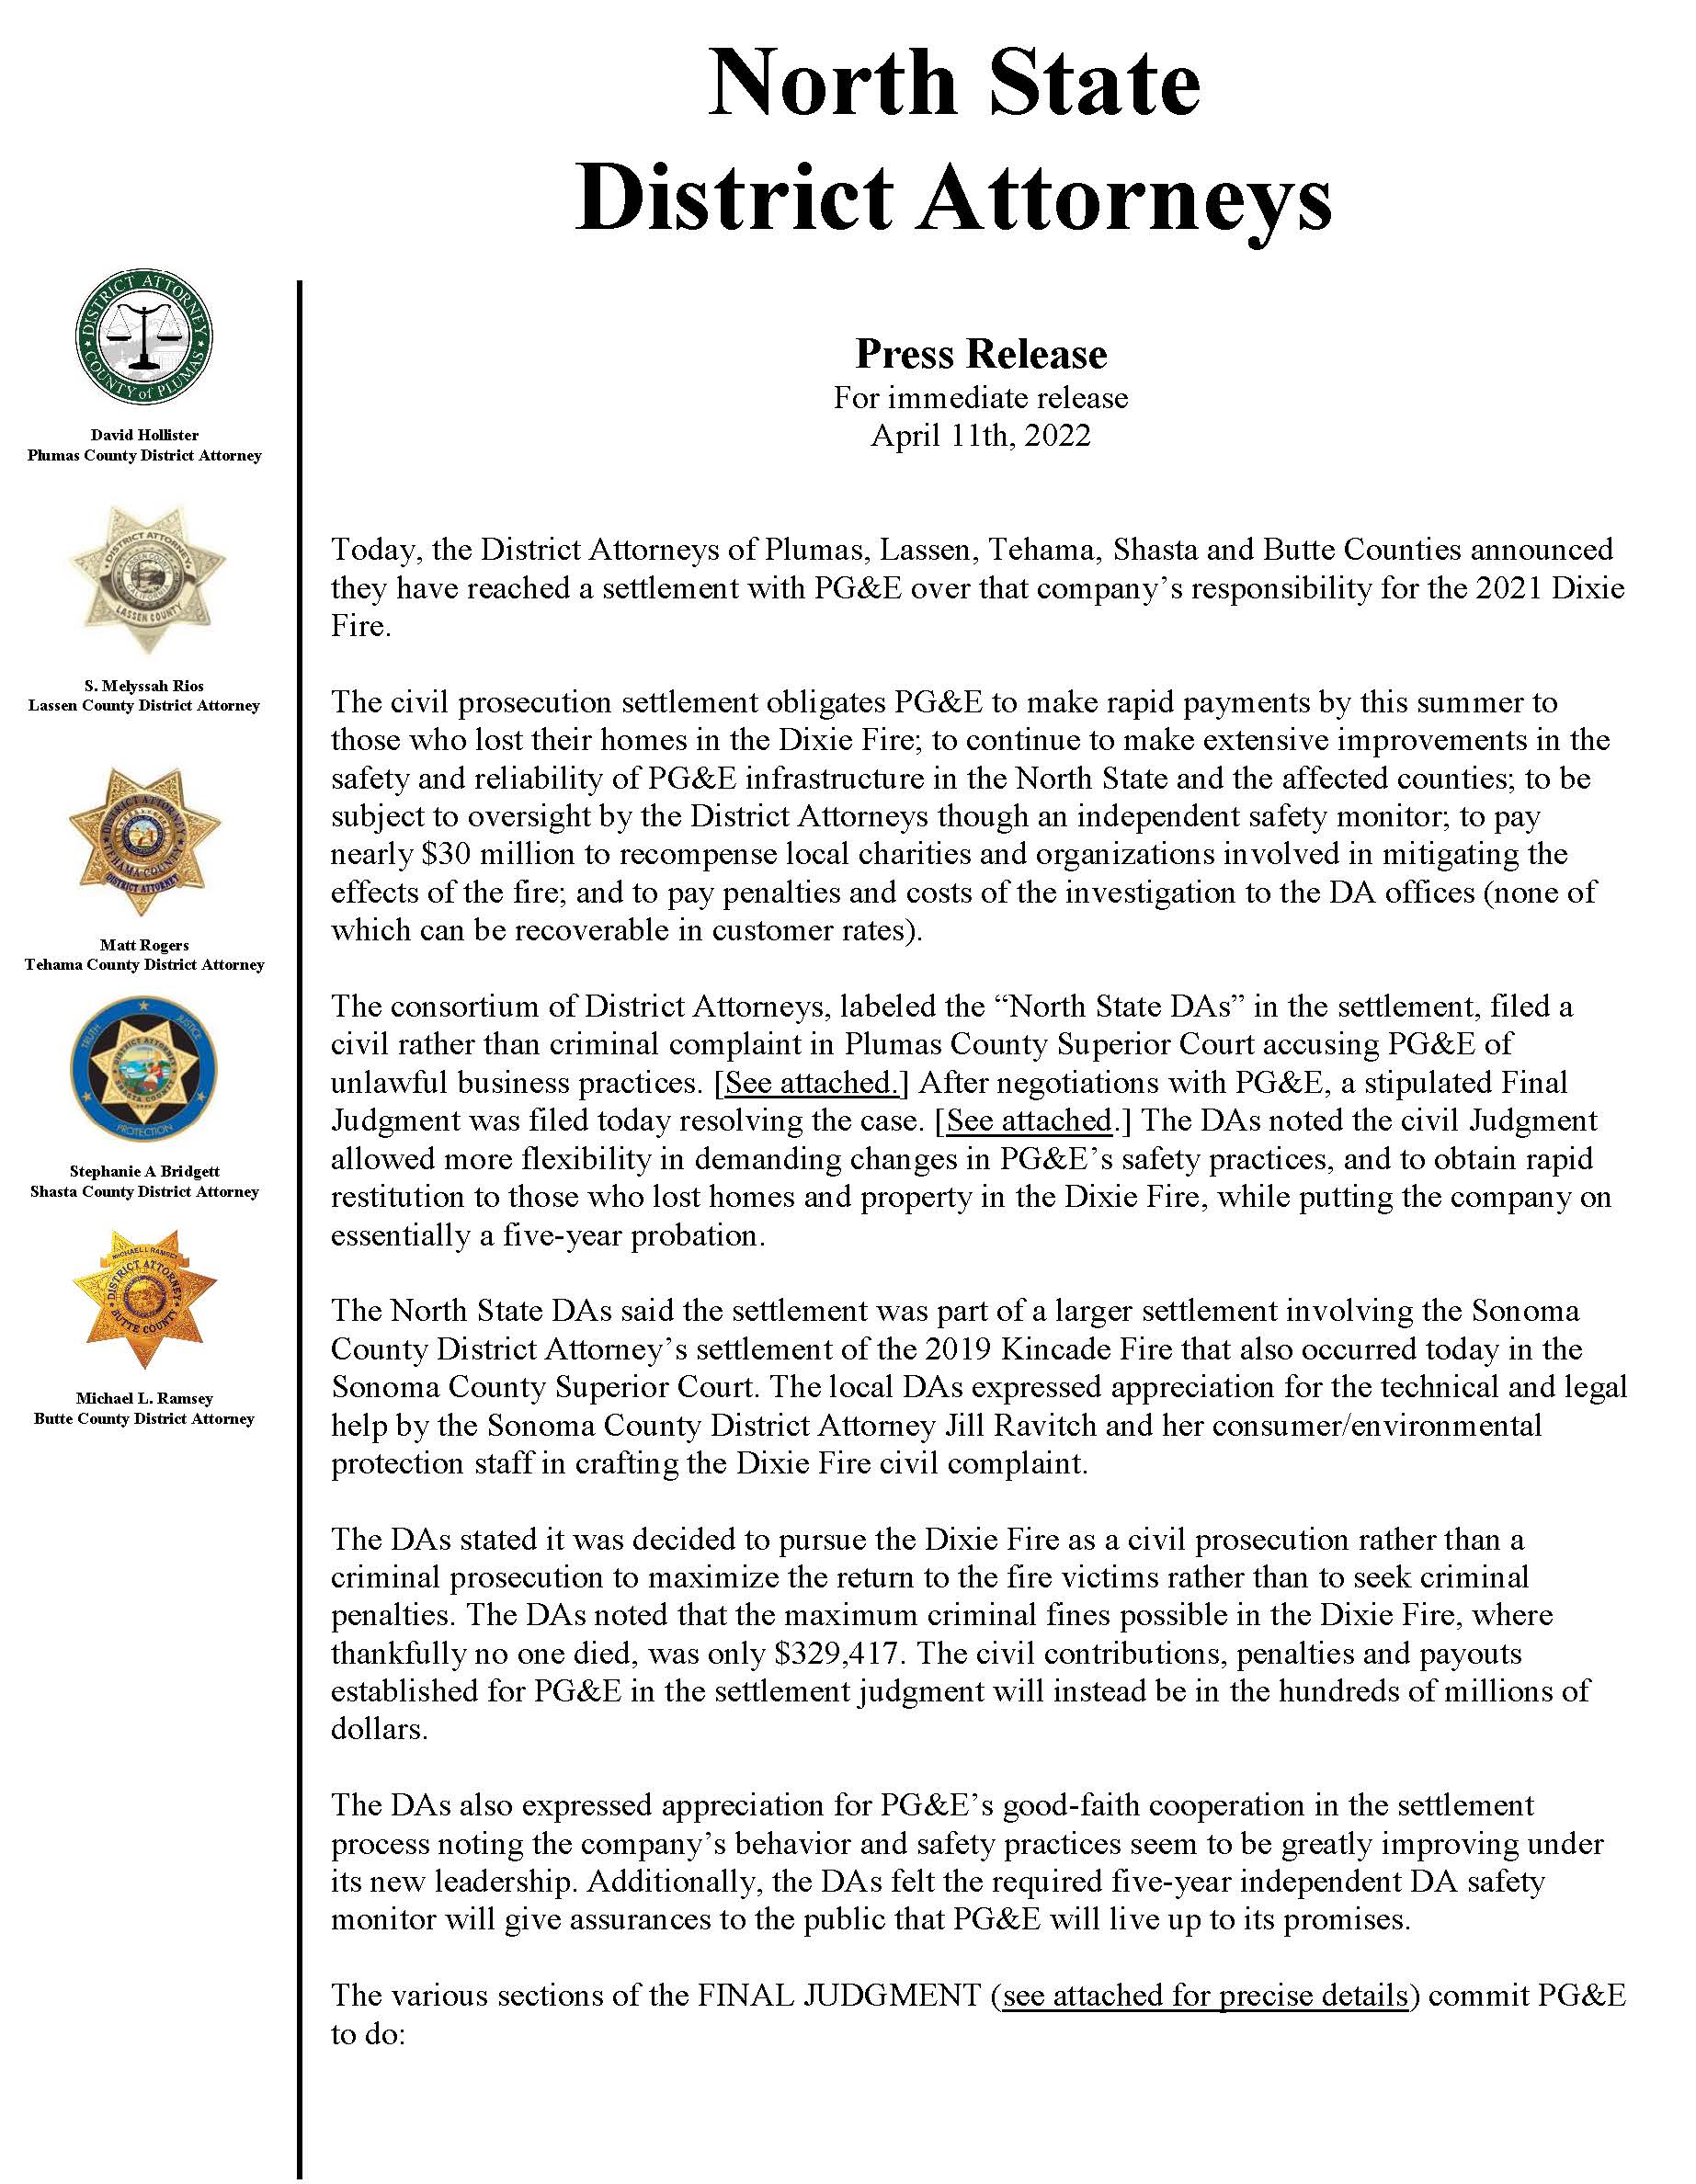 Dixie_Fire-Plumas_County_Press_Release_Dixie_Fire_04-11-22_Page_1.jpg